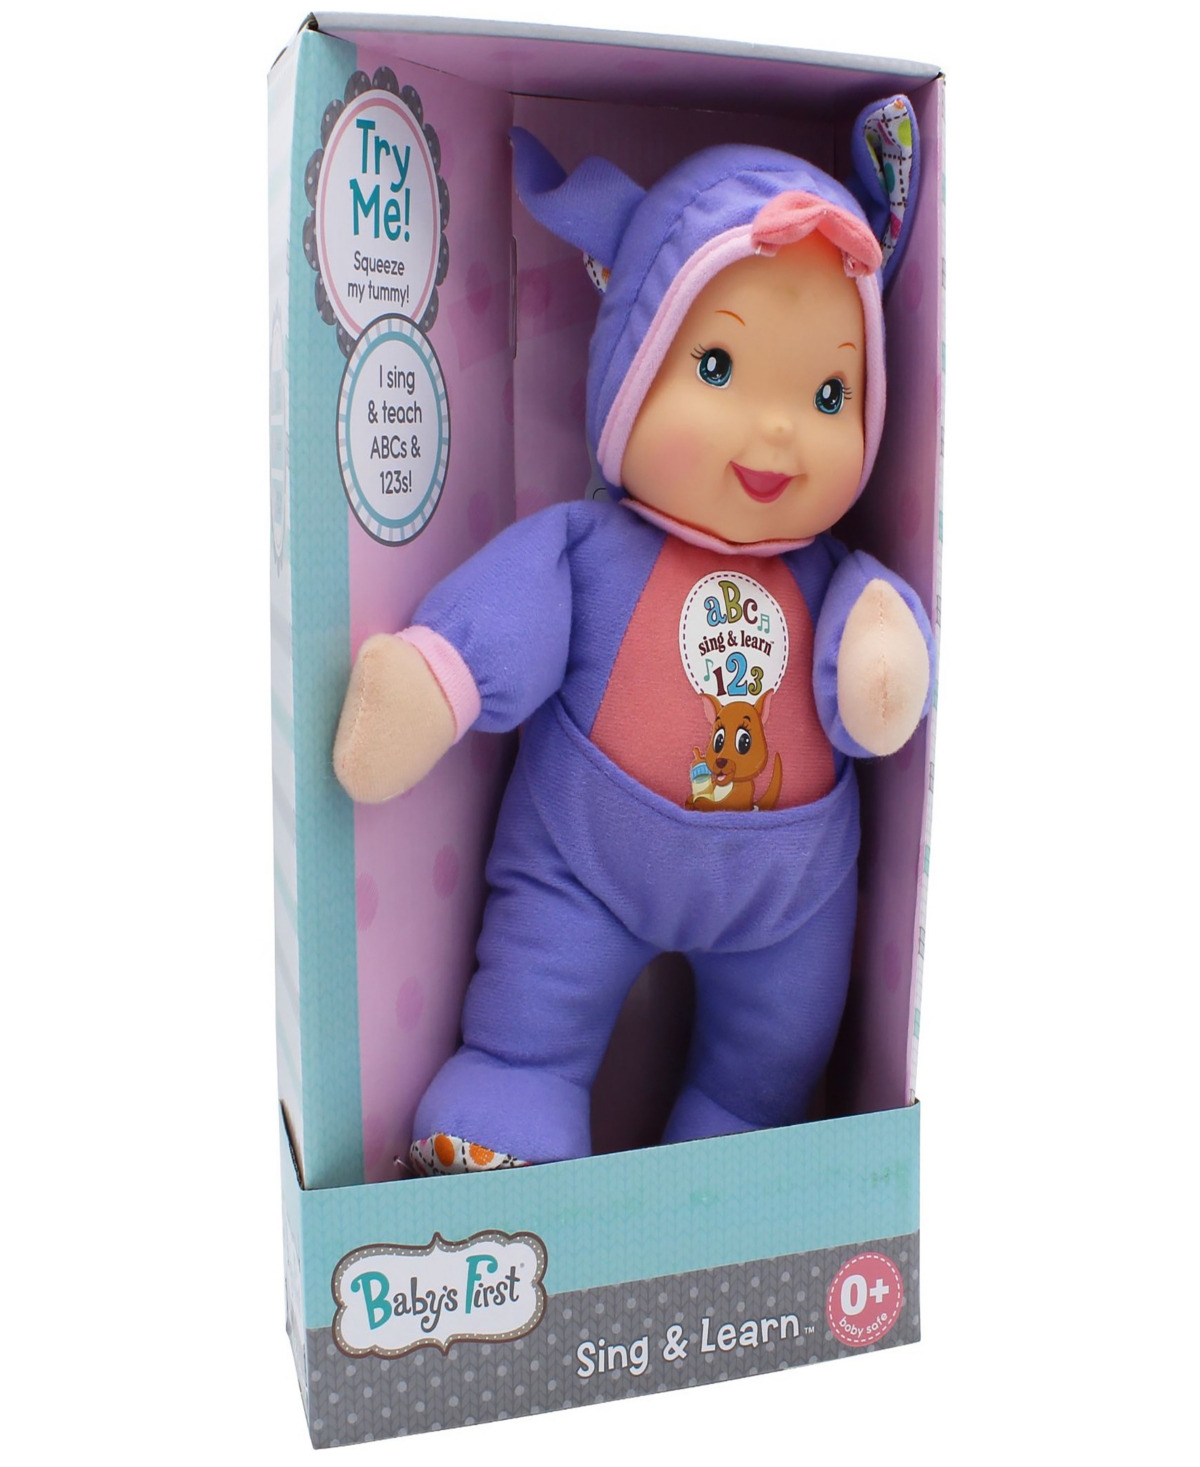 Baby's First By Nemcor Babies' Sing Learn Purple Kangaroo Toy Doll In Multi